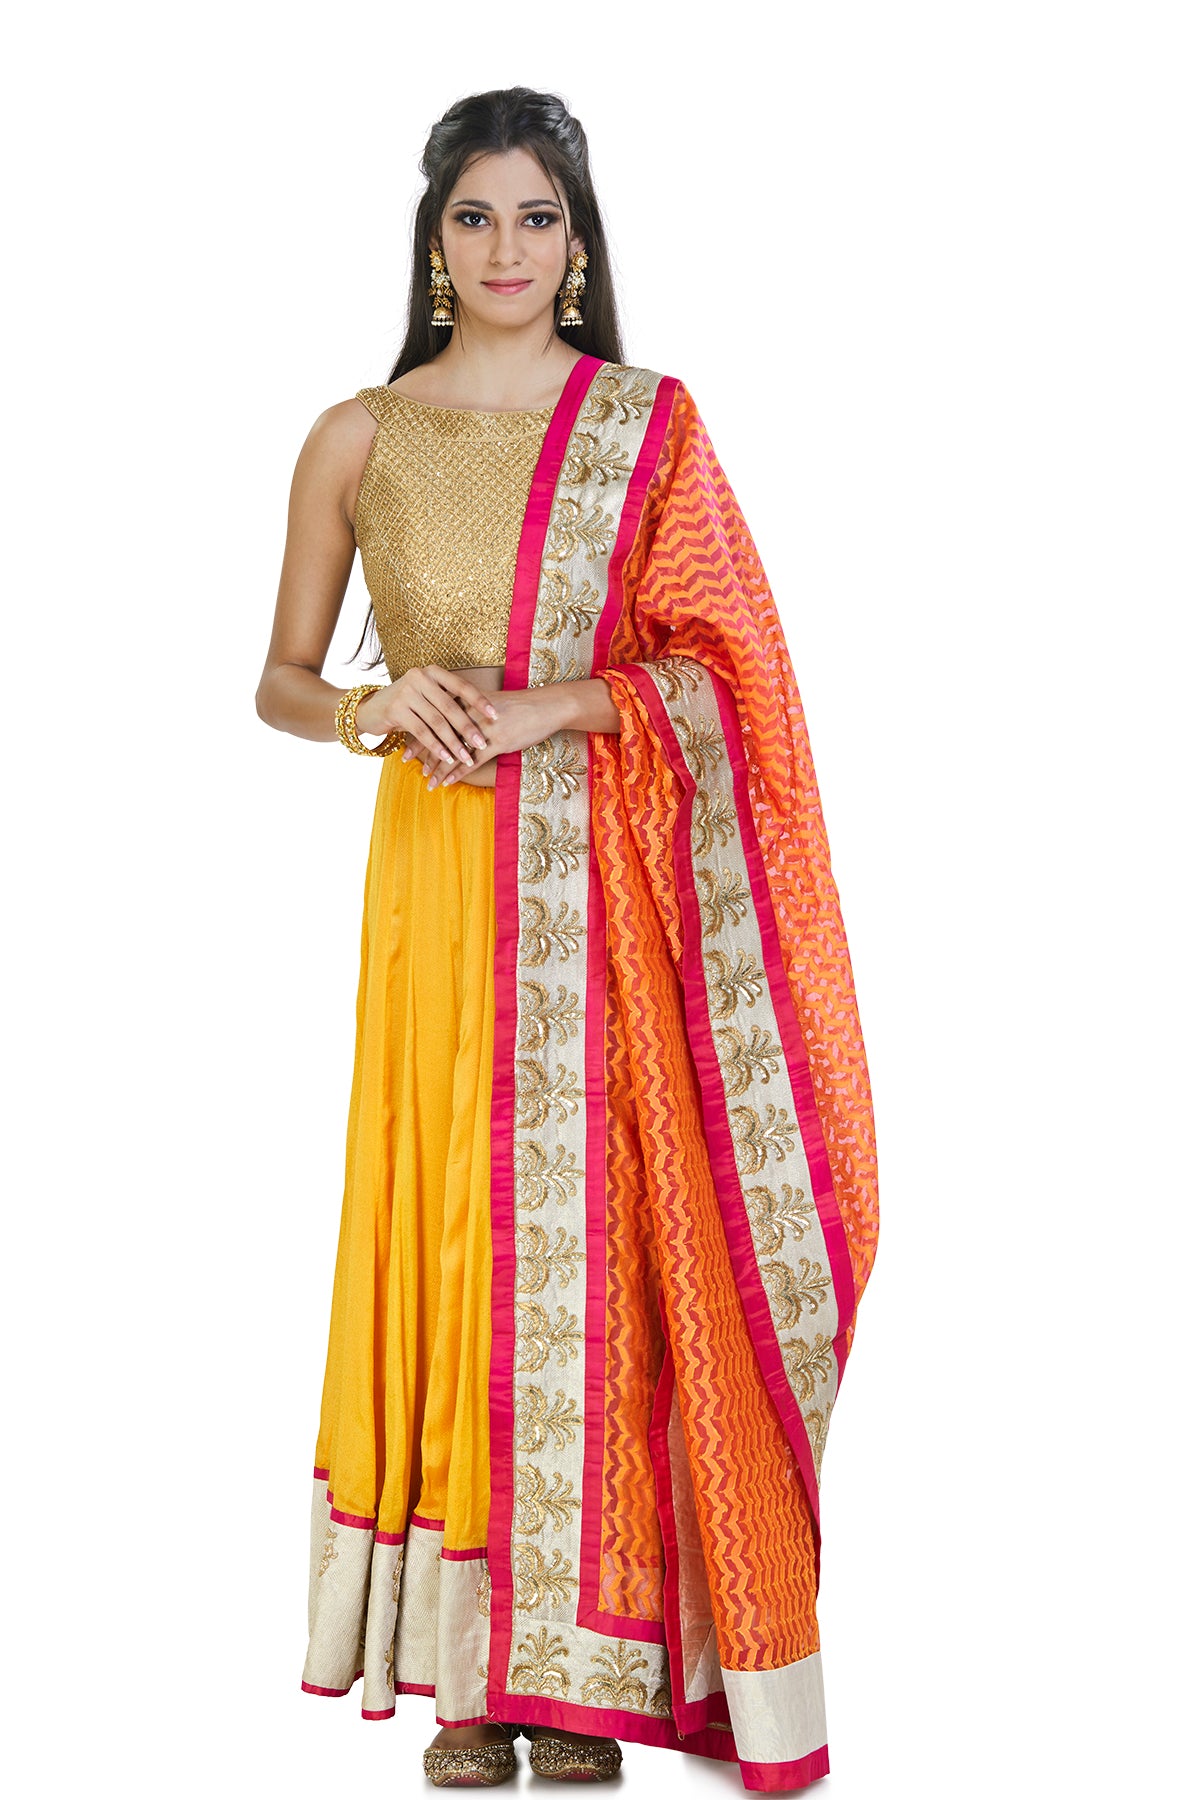 Vibrant & versatile, this saffron-colored silk, hand-embroidered skirt is complemented with a kardana embroidered fold blouse and pink chanderi dupatta.